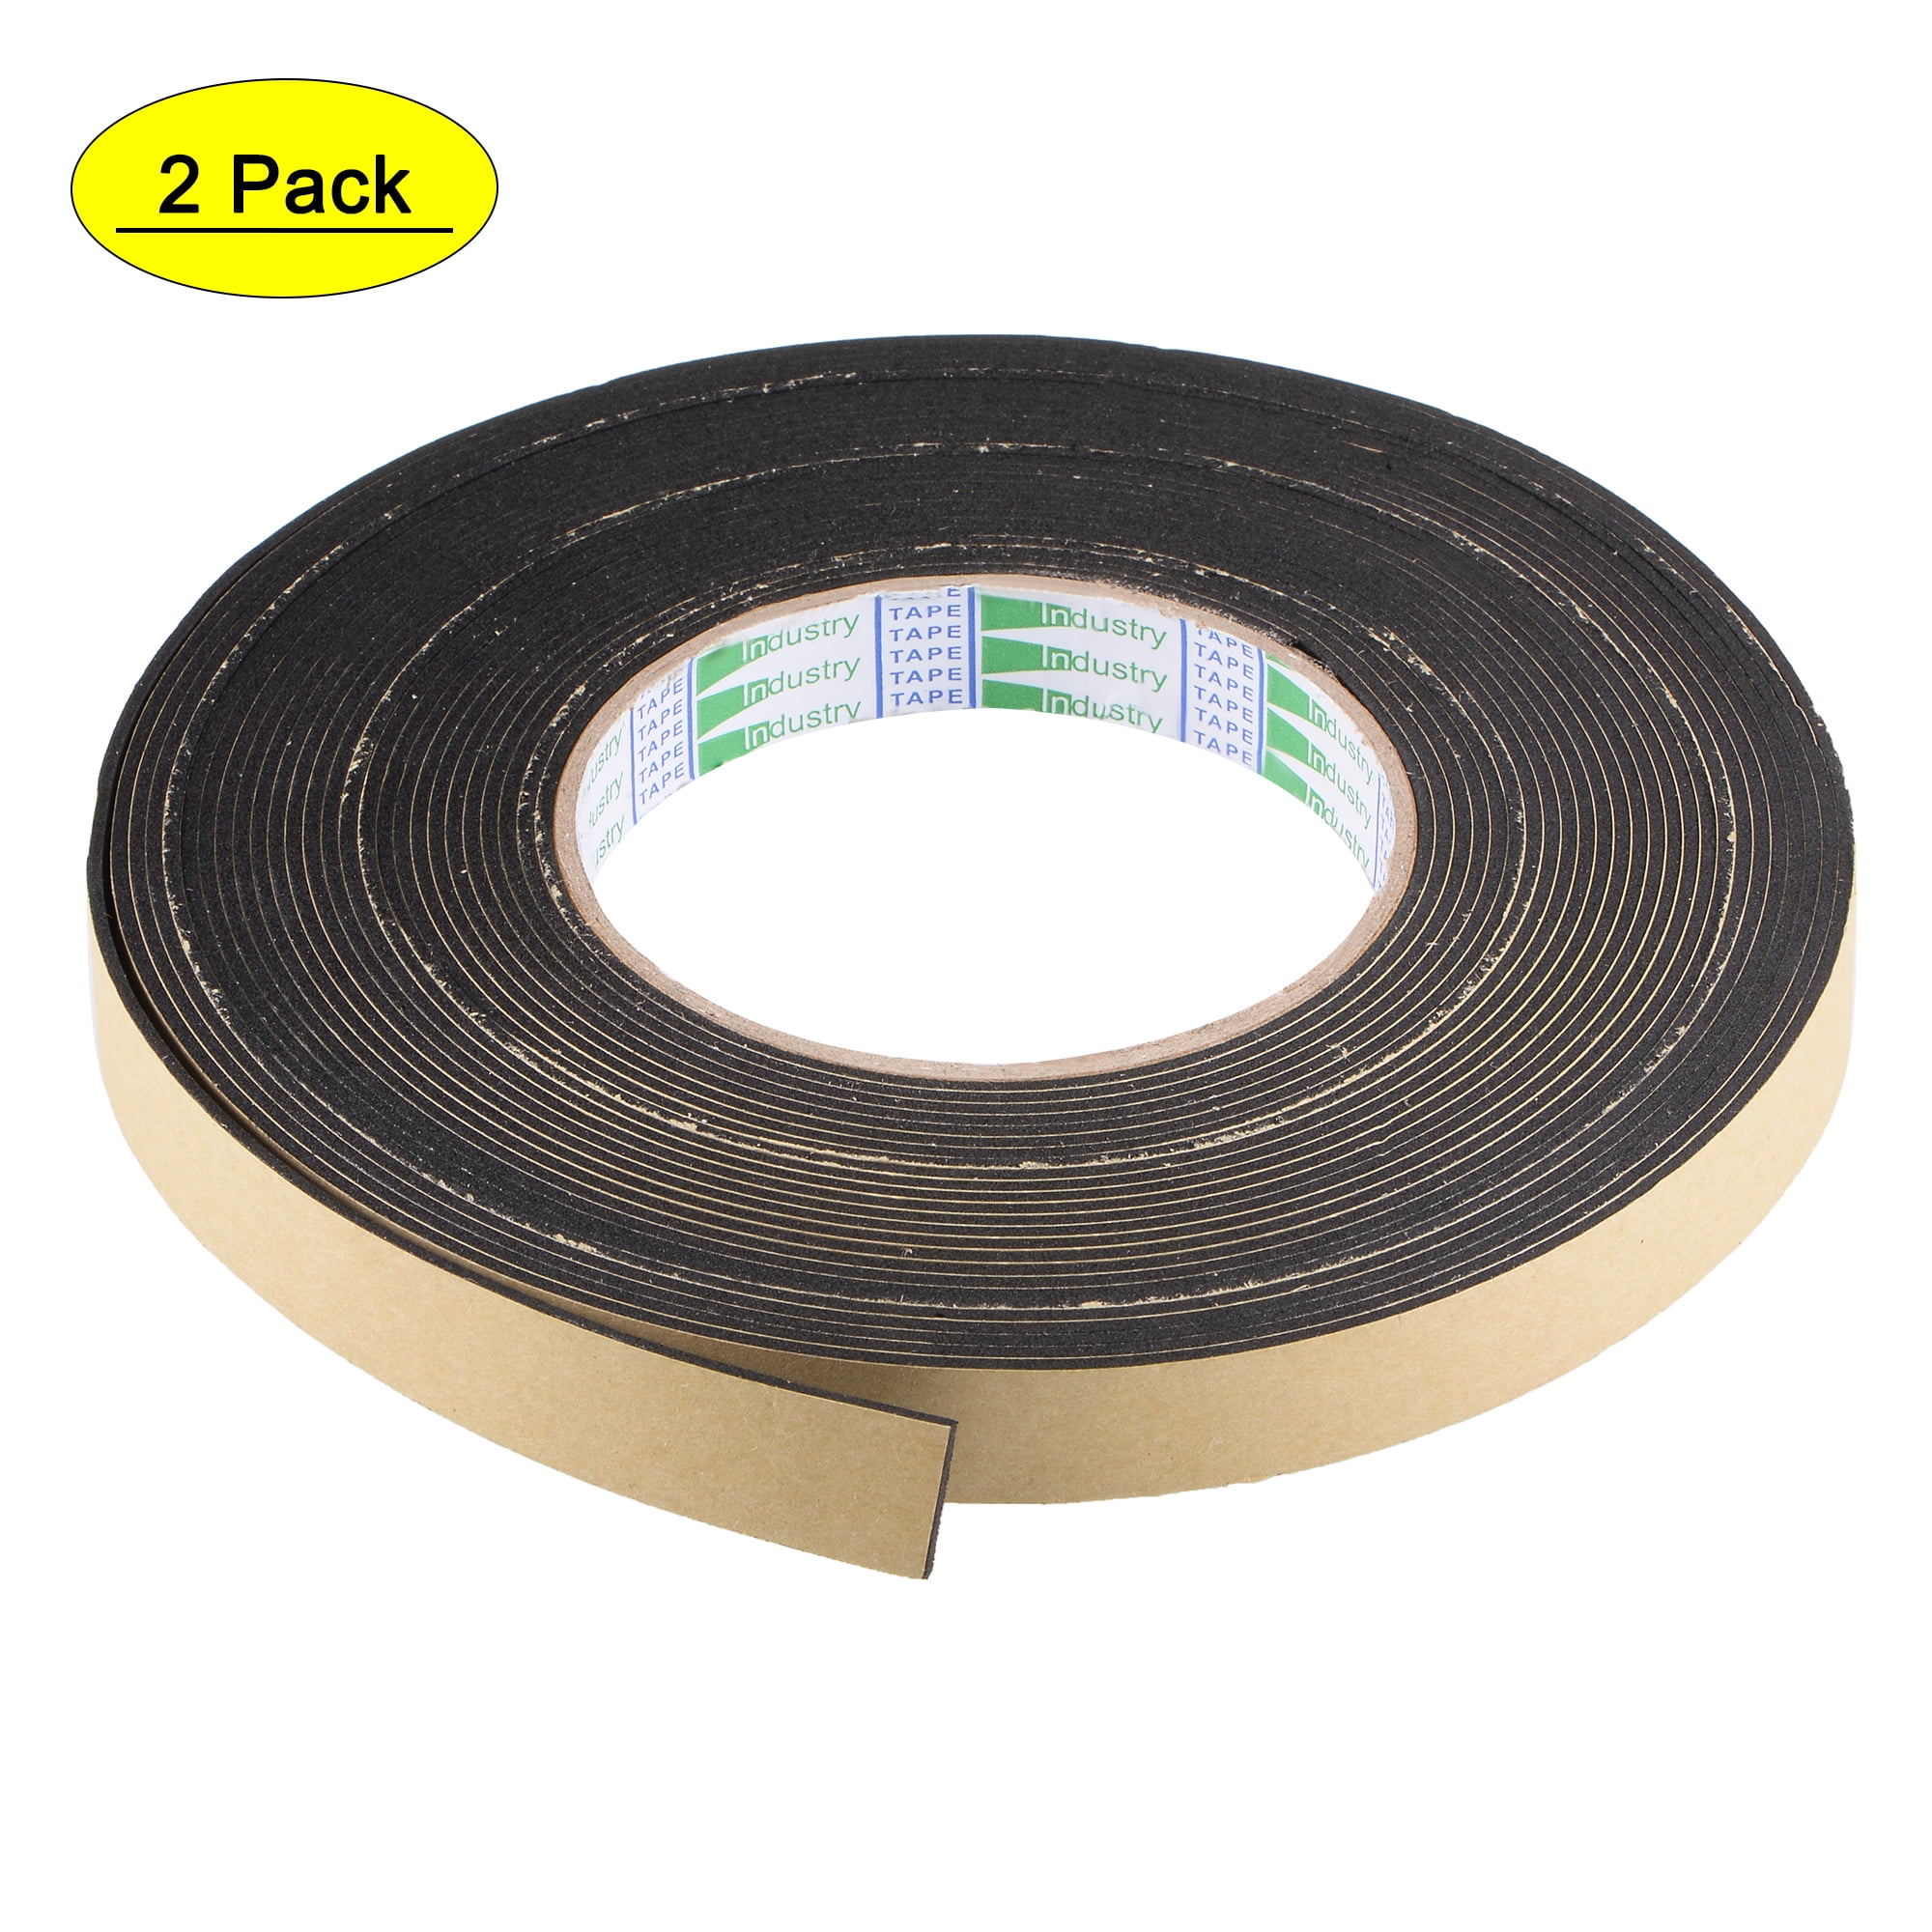 Thick 2/3mm PE Strongly Sticky Foam Double-sided tape Sponge Tape Strip 